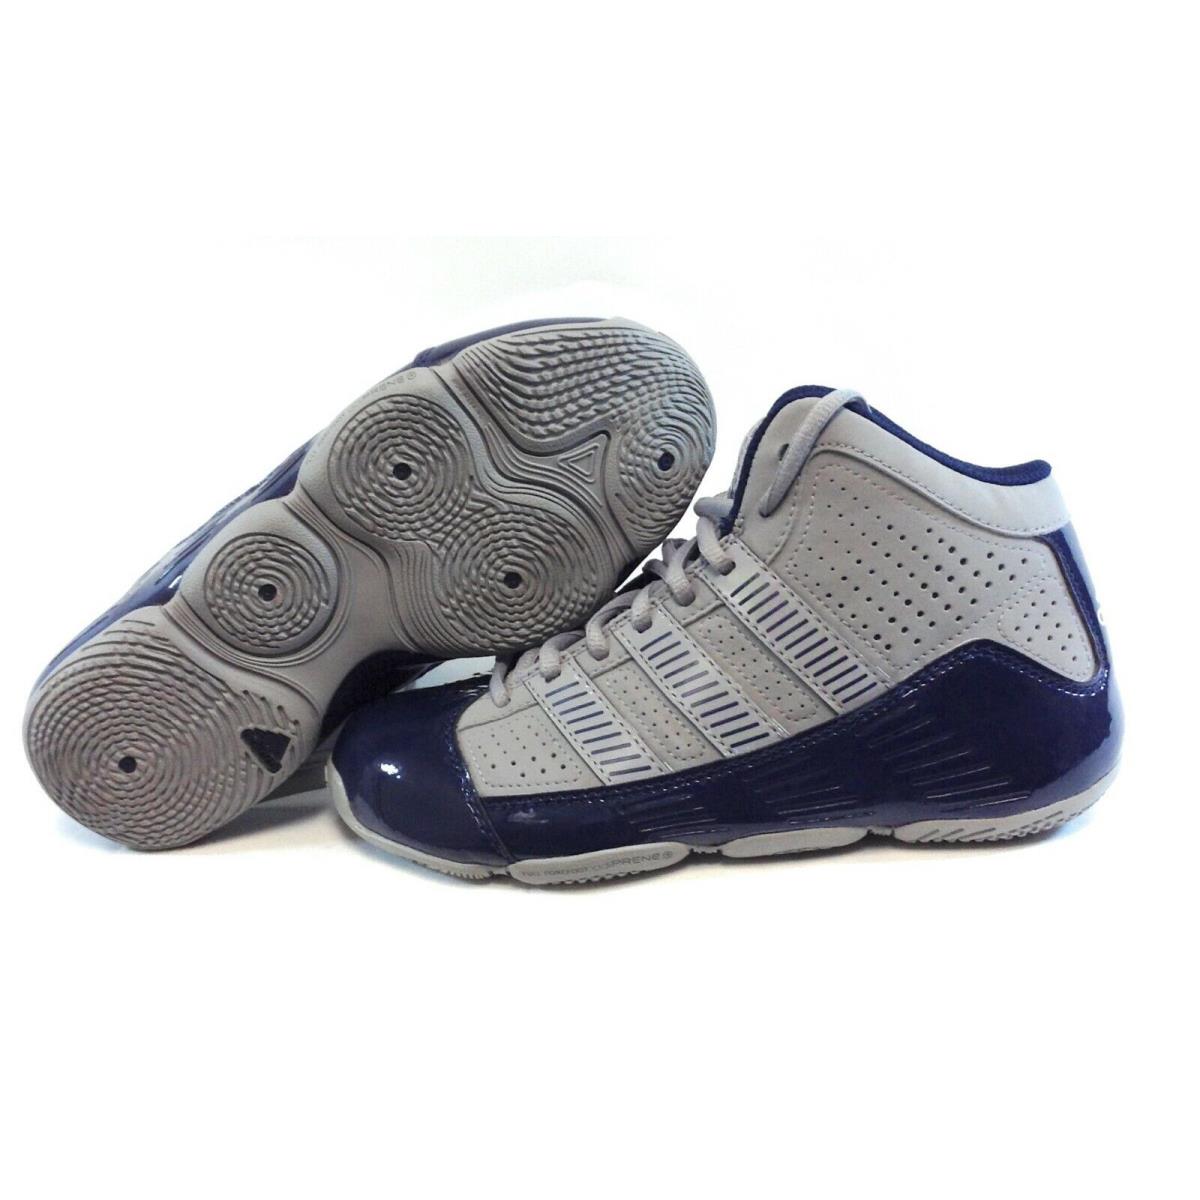 Youth Boys Kids Adidas Commander TD G49717 Basketball 2011 DS Sneakers Shoes - Grey